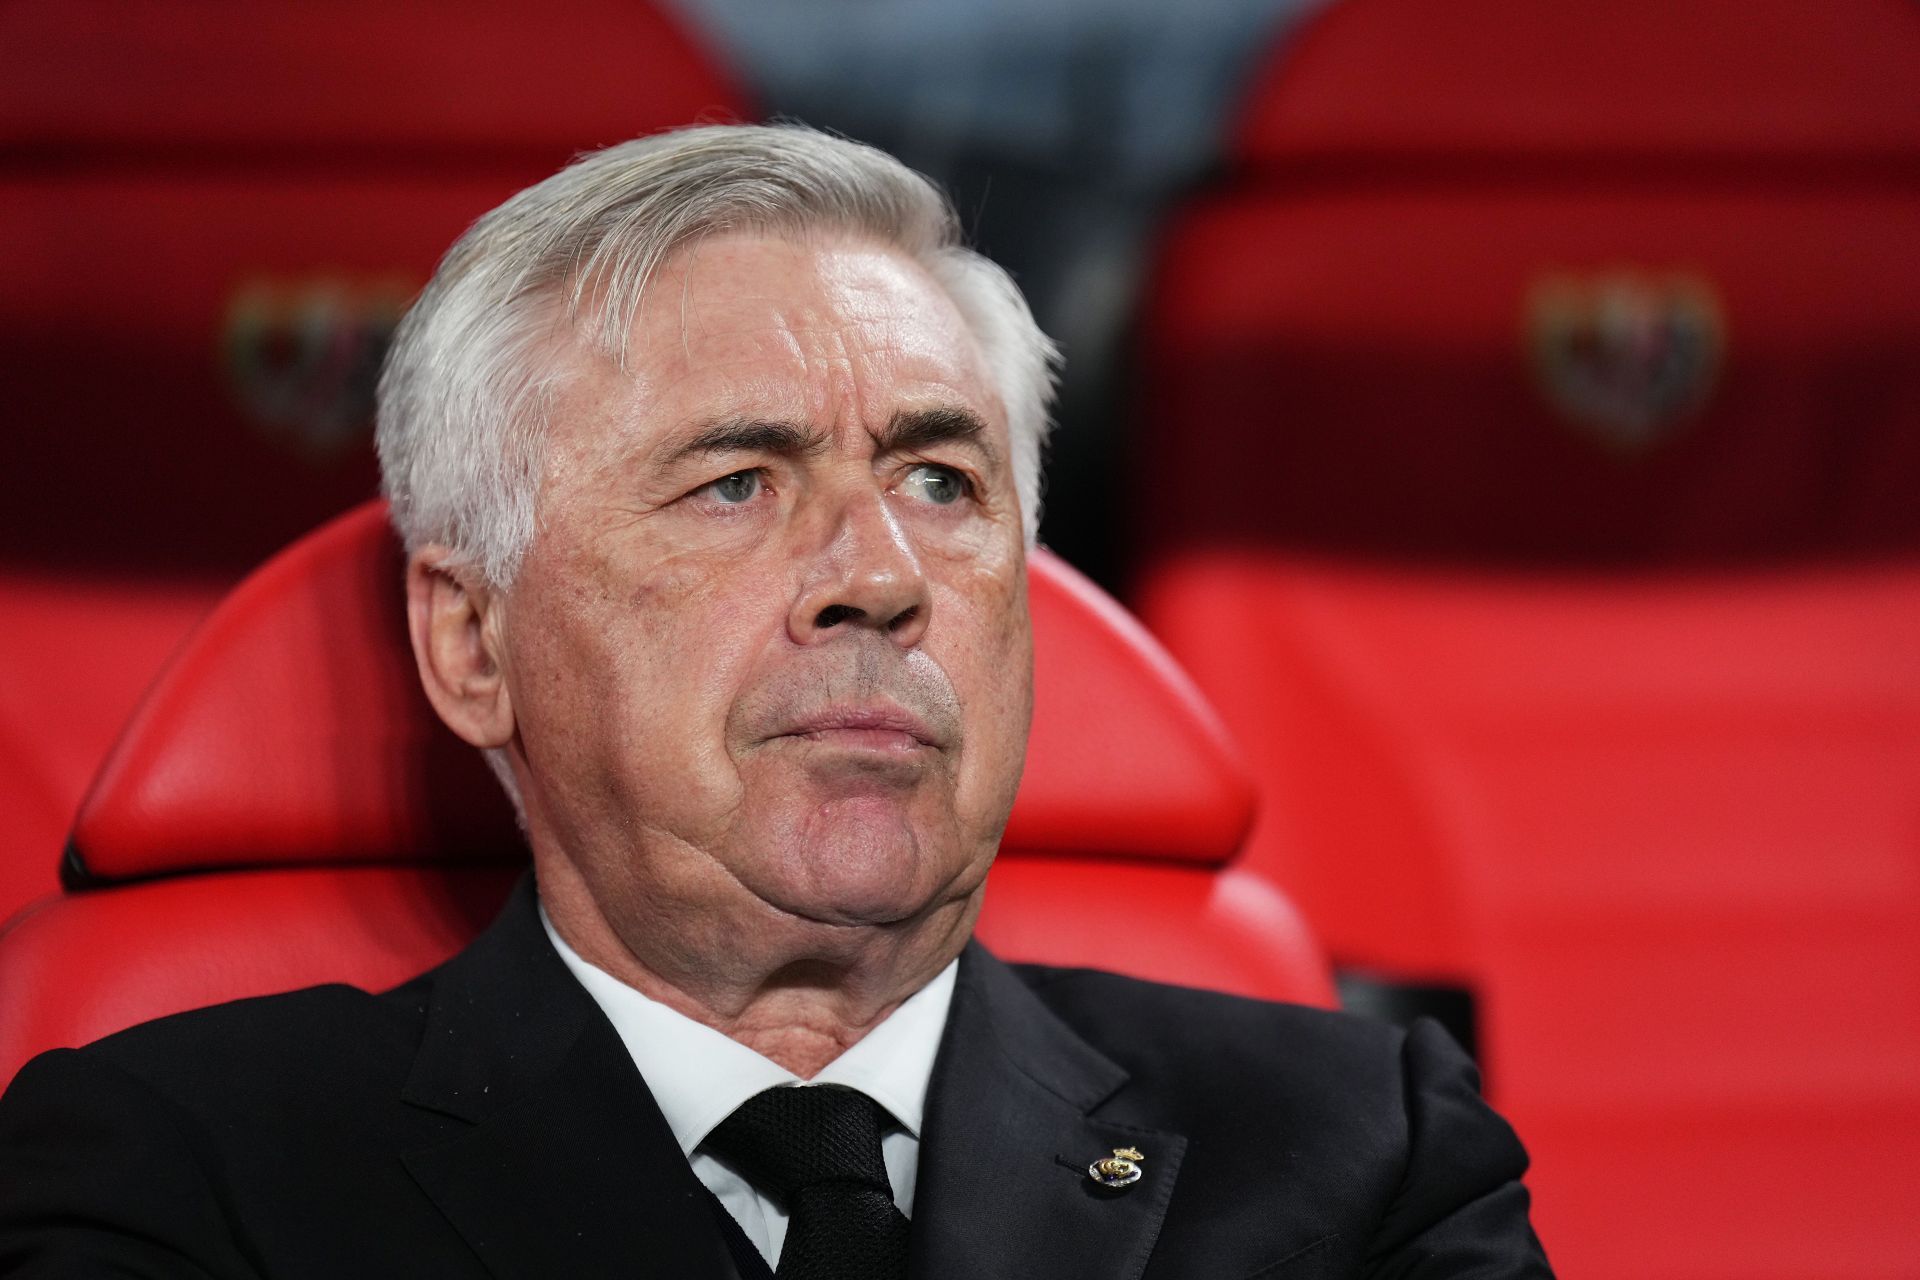 Real Madrid manager - Carlo Ancelotti